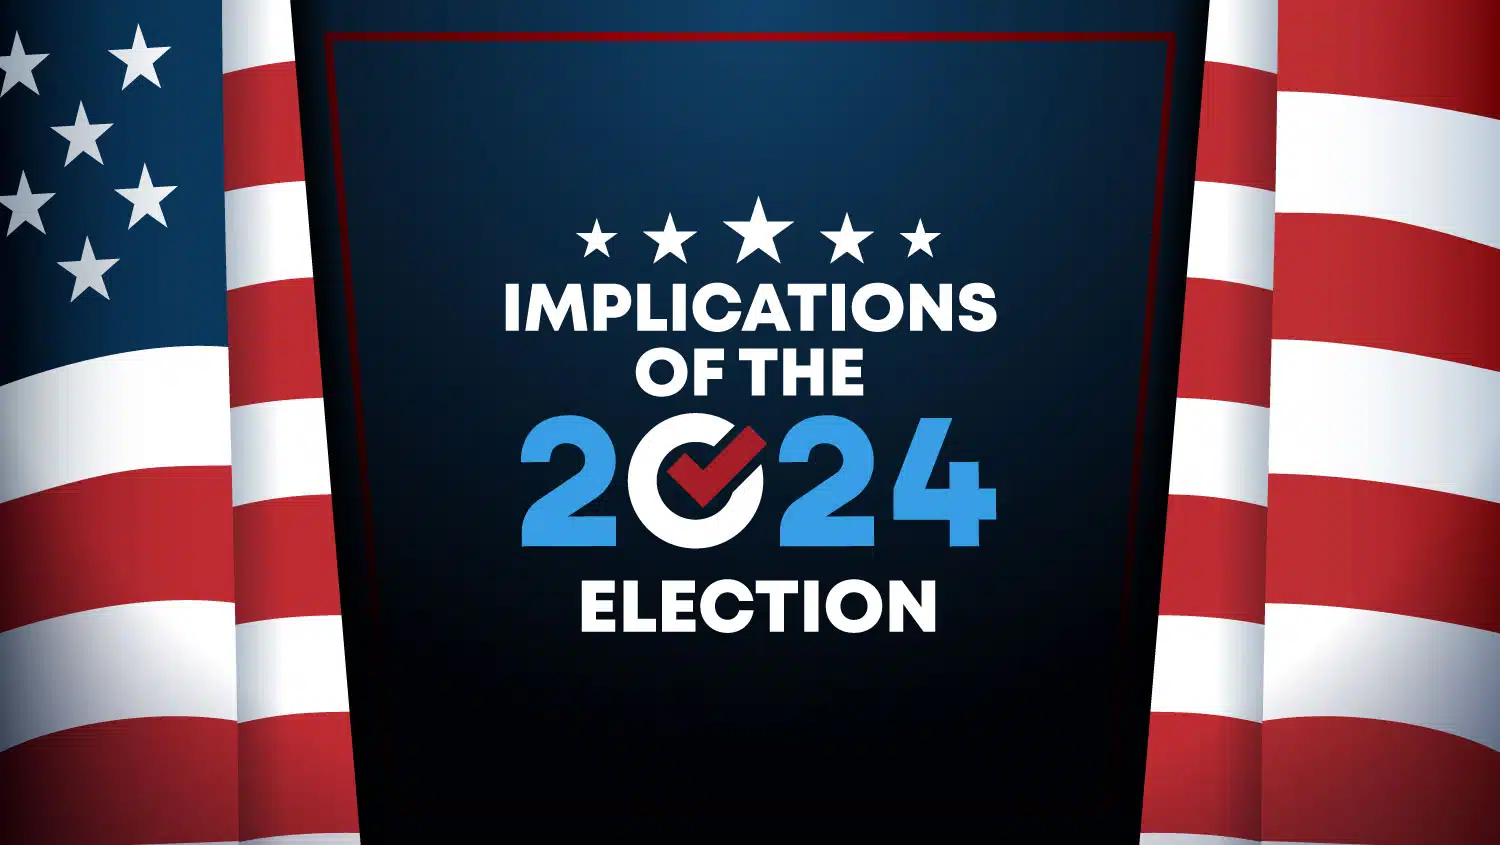 Featured image for “Implications of An Election Year”